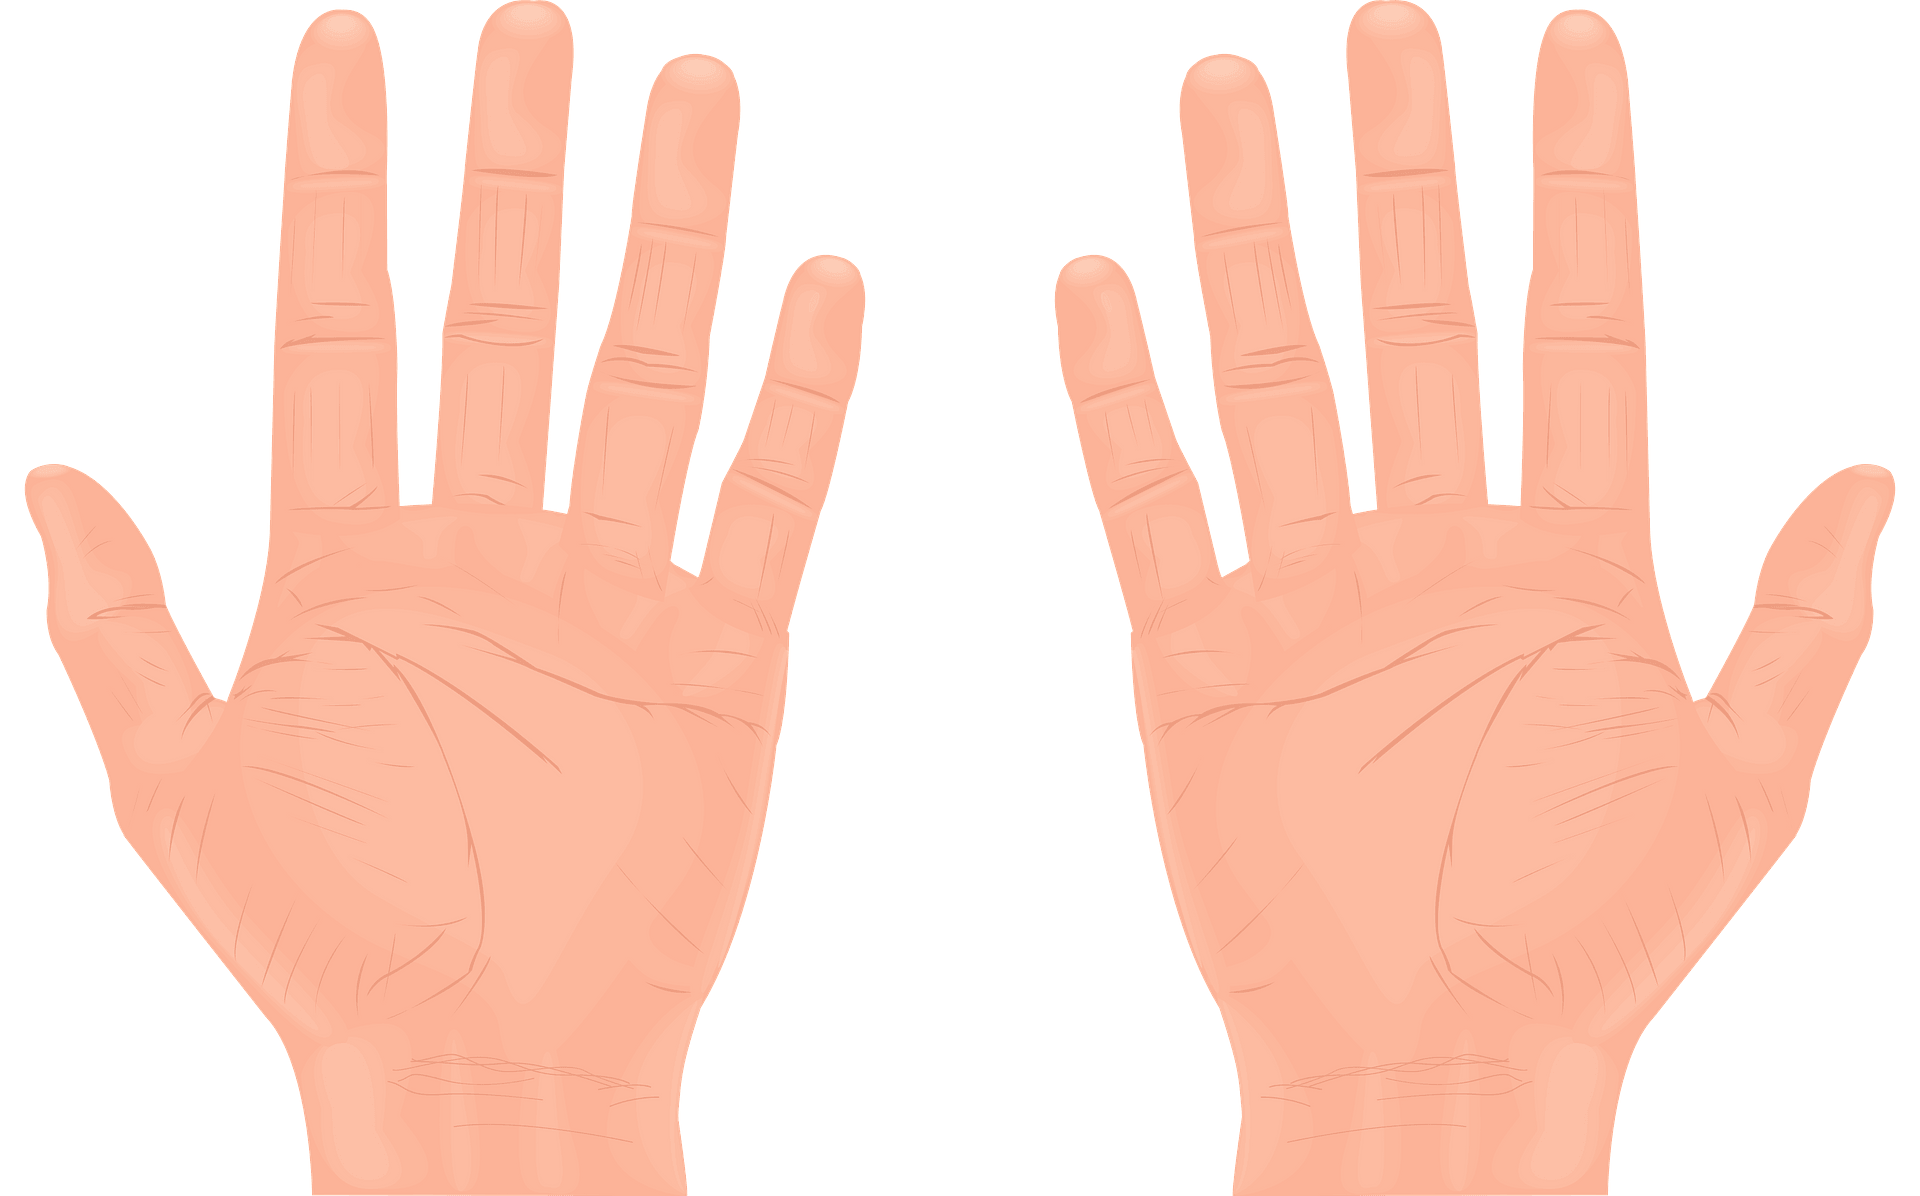 Free clipart hands, Download Free clipart hands png images, Free ...